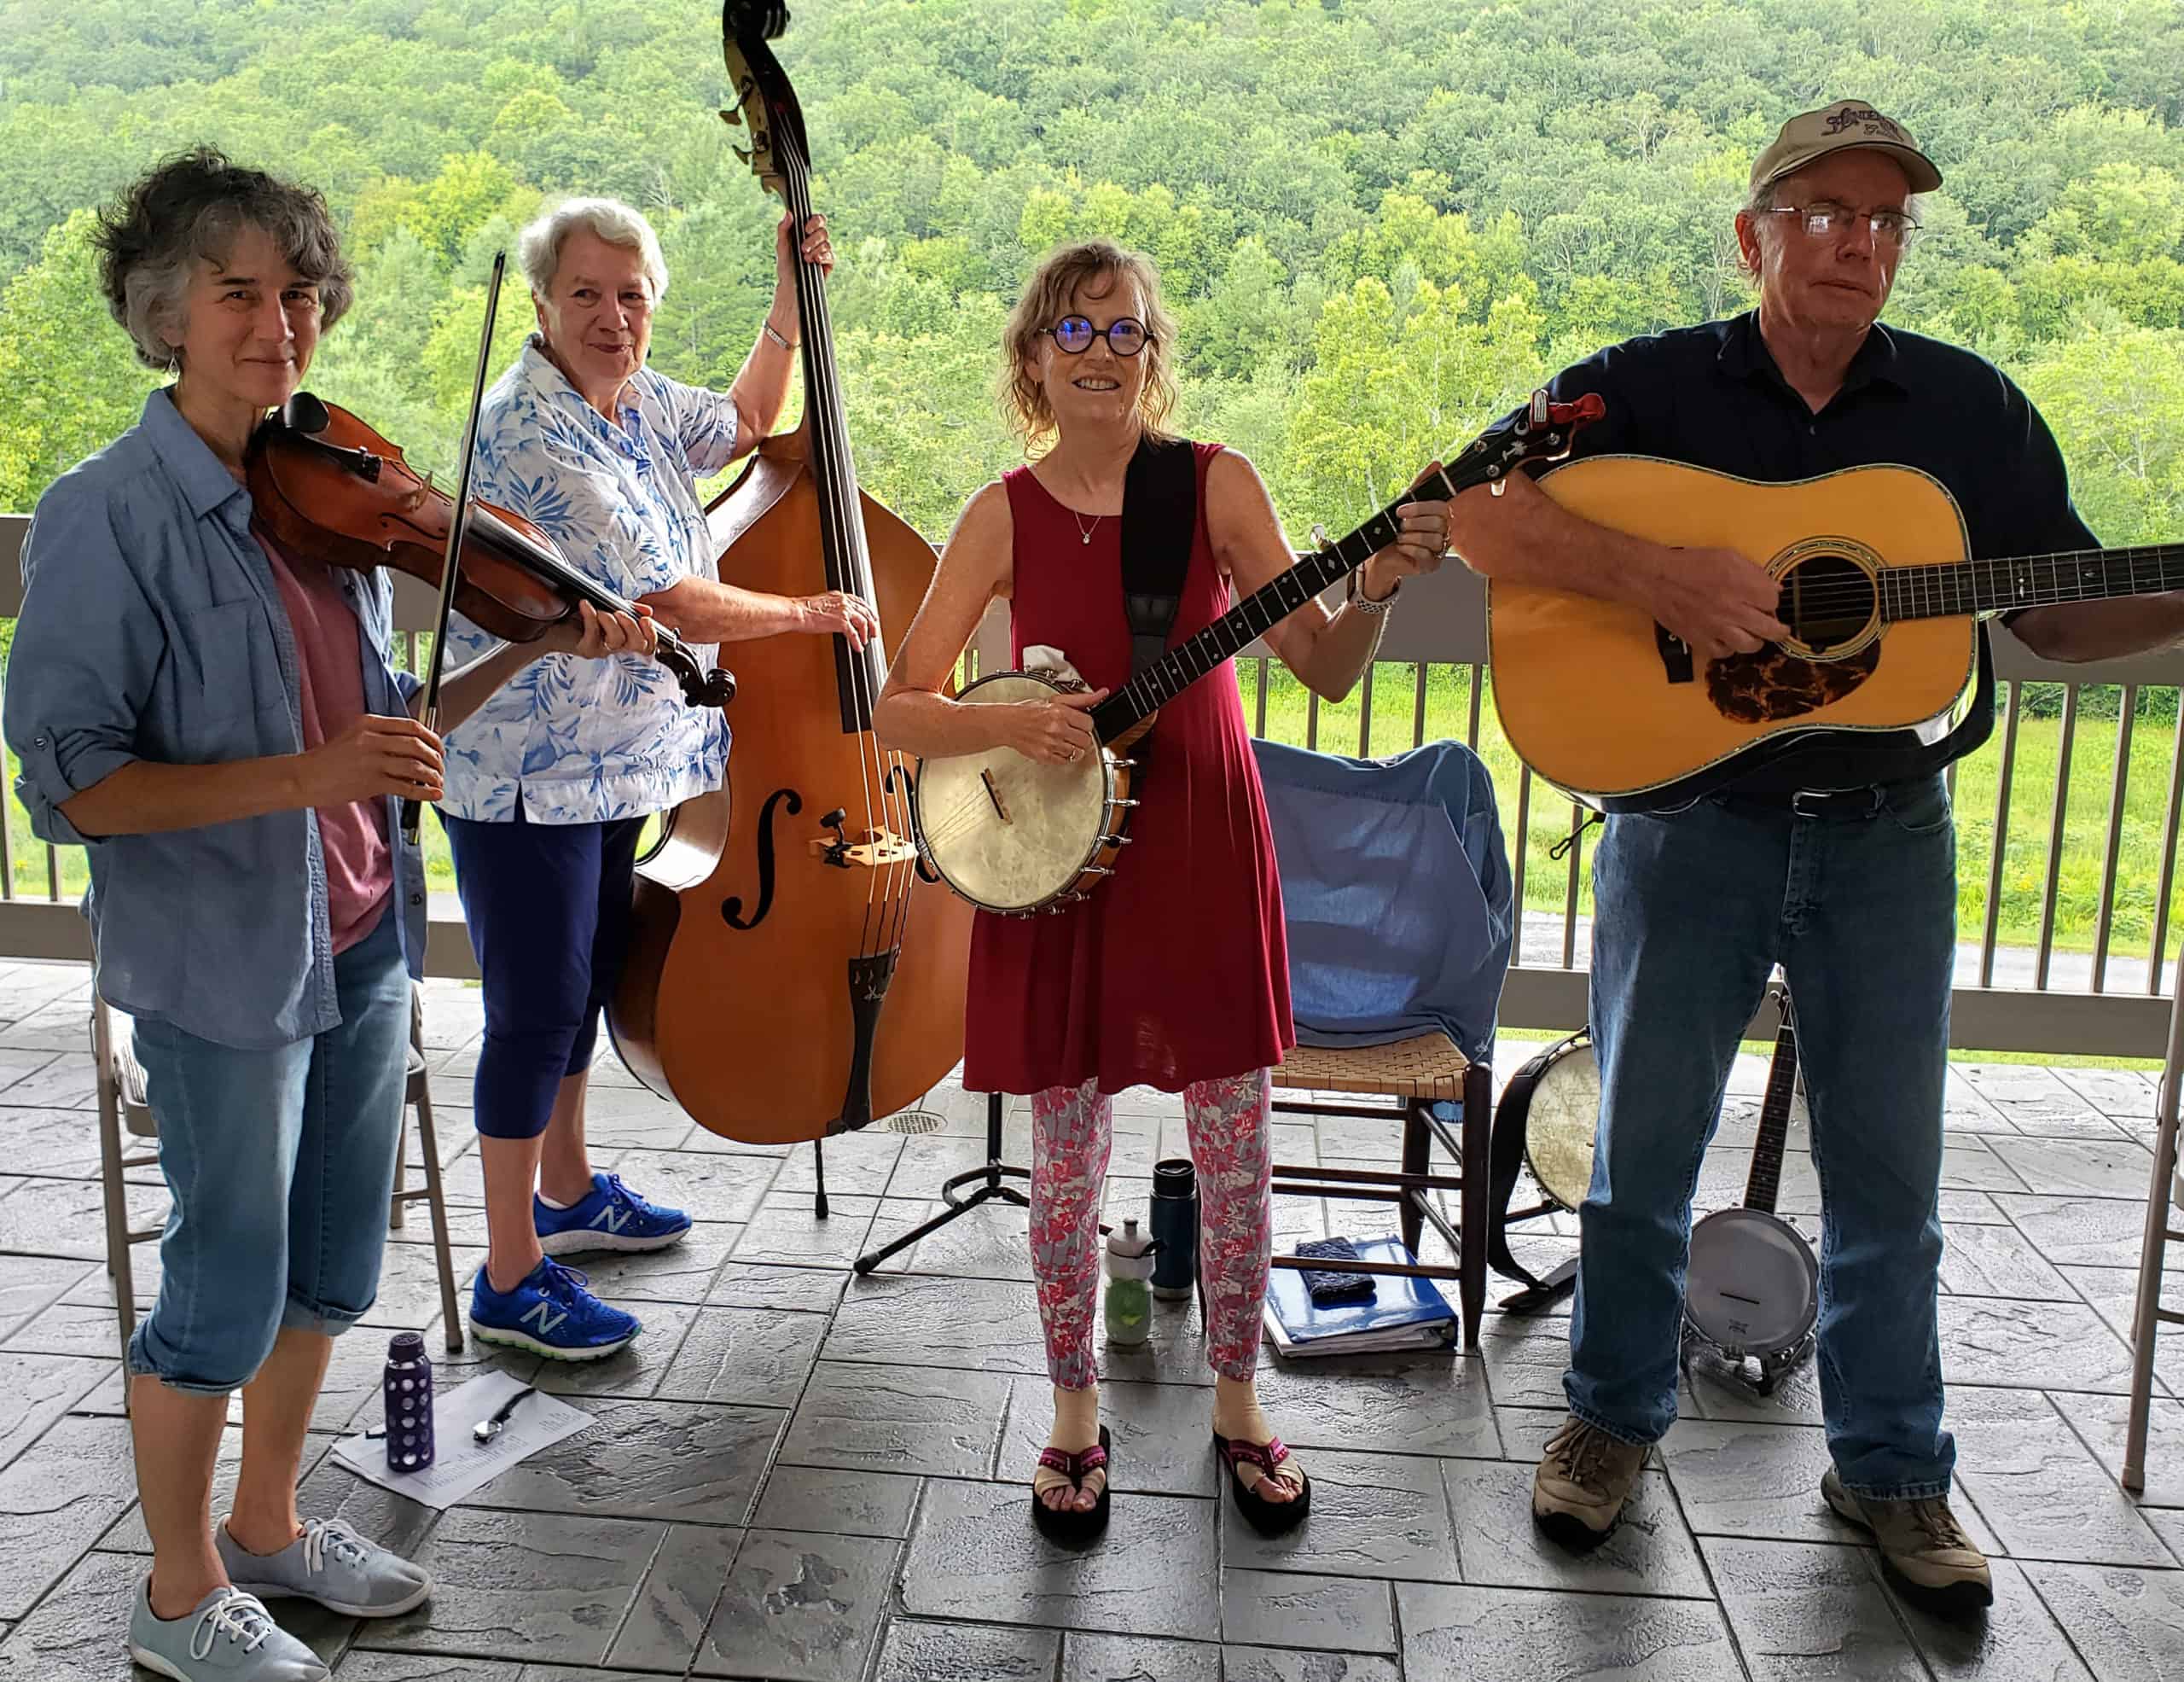 Miss Ellie and the Buck Mountaineers playing music and smiling